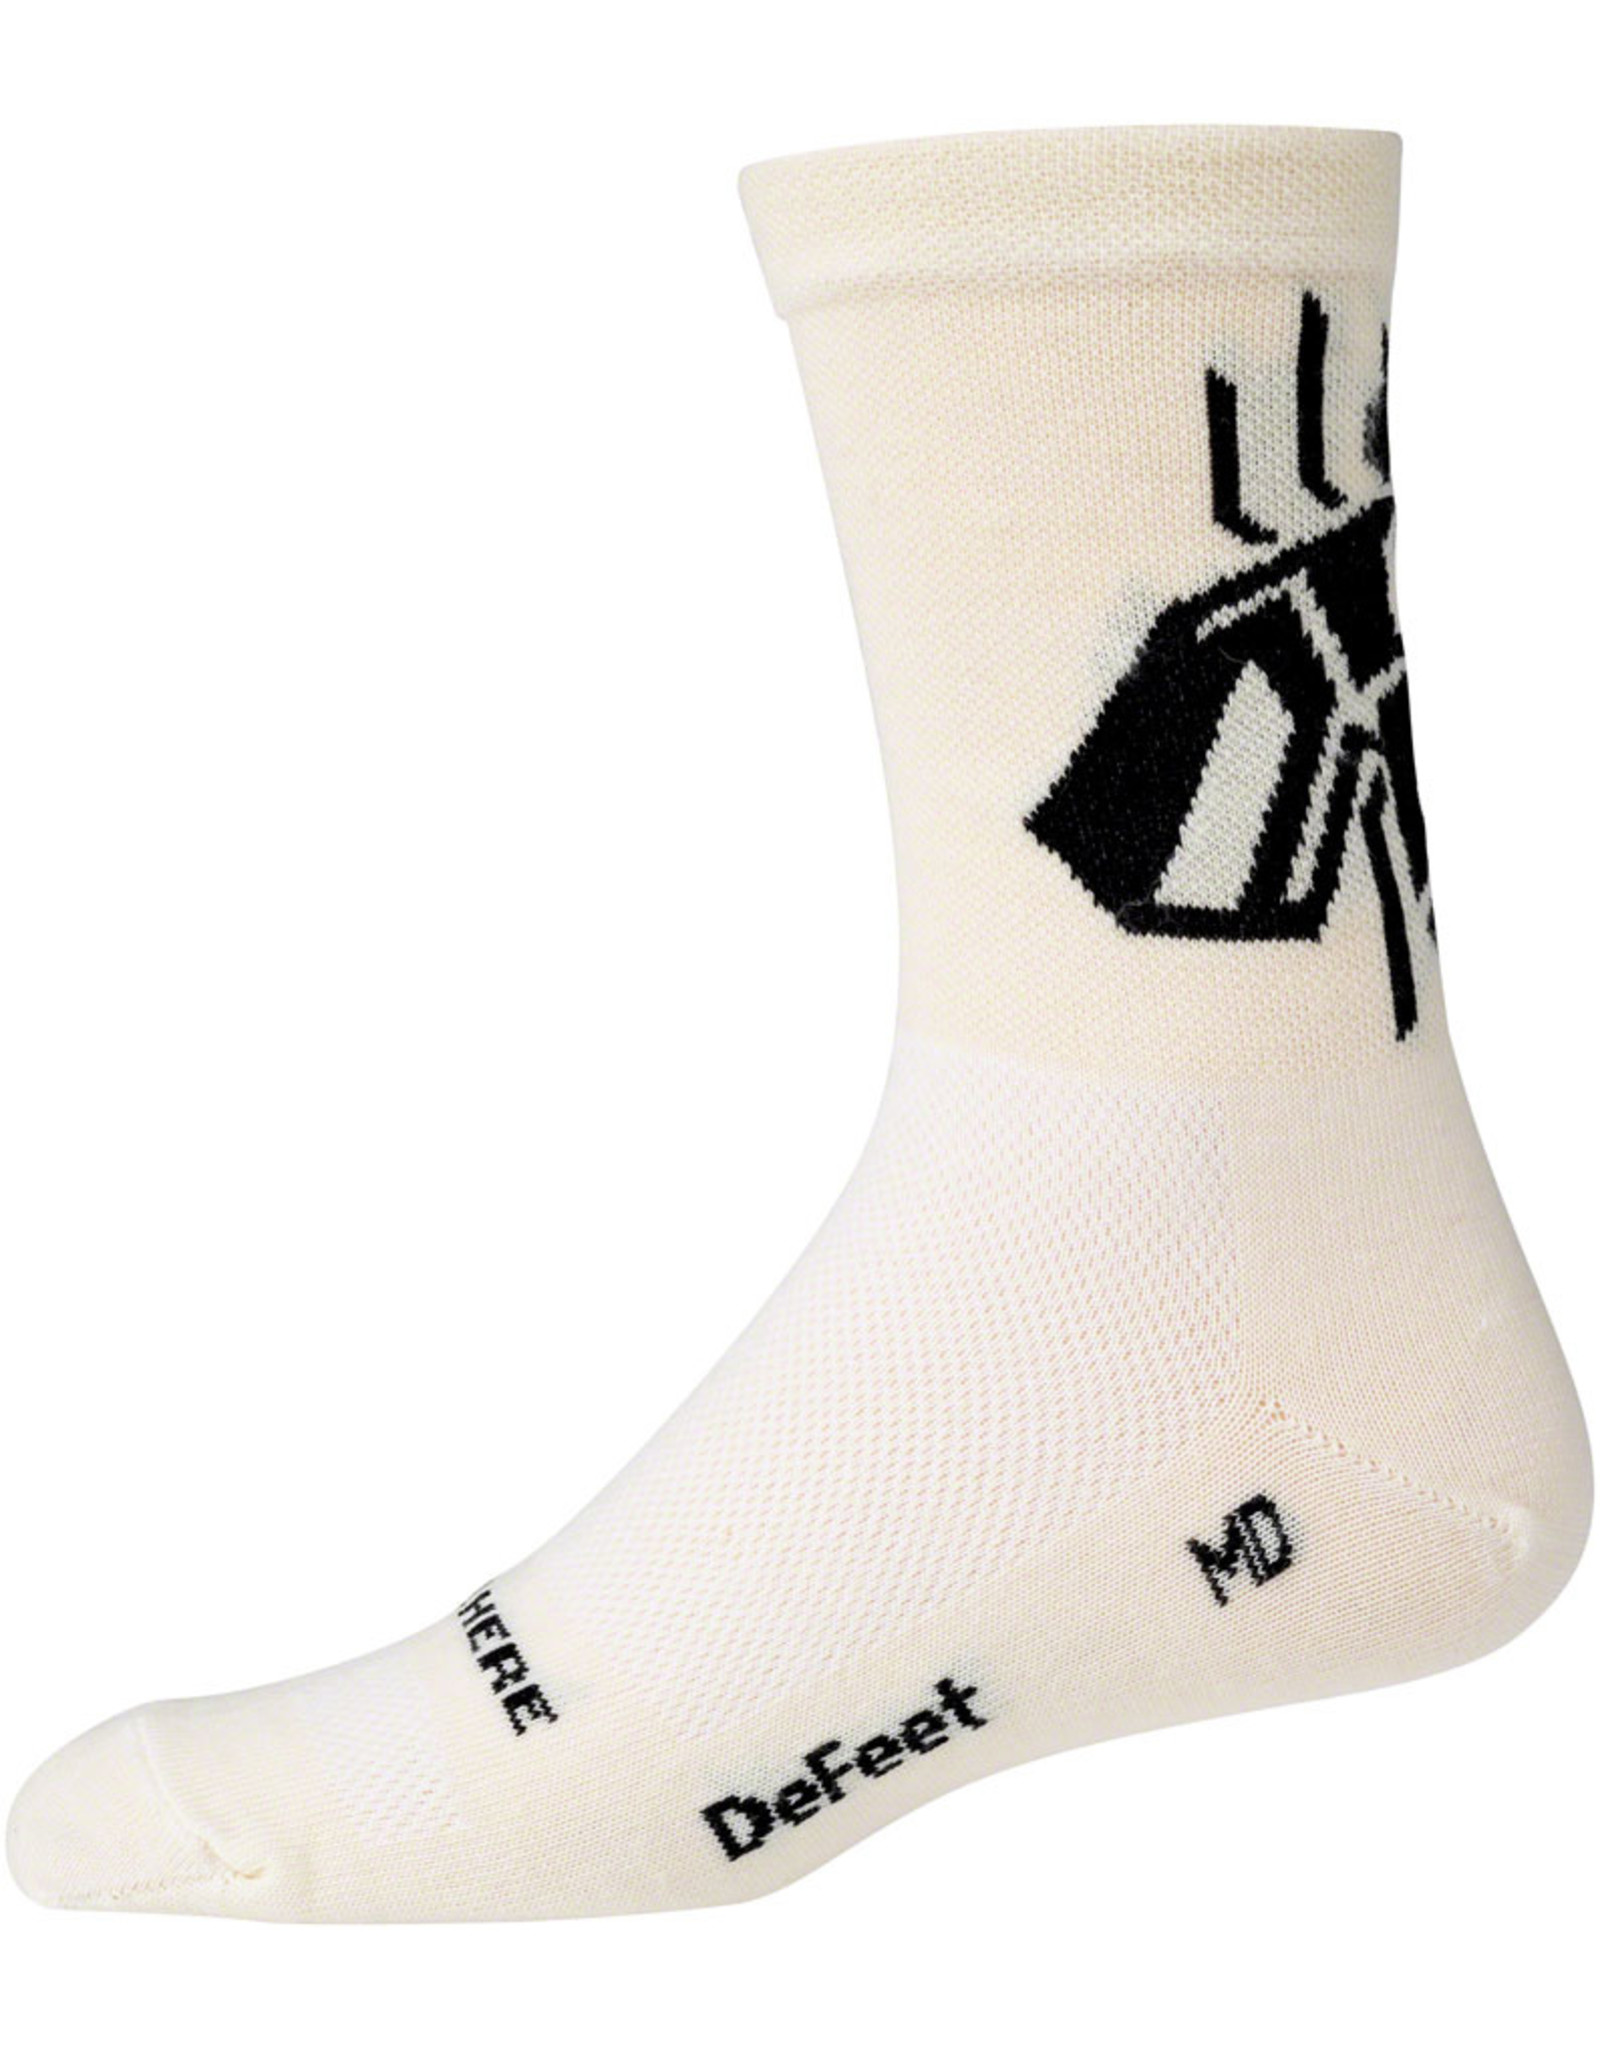 Surly Surly Wingnut Wool Sock - Natural/Black